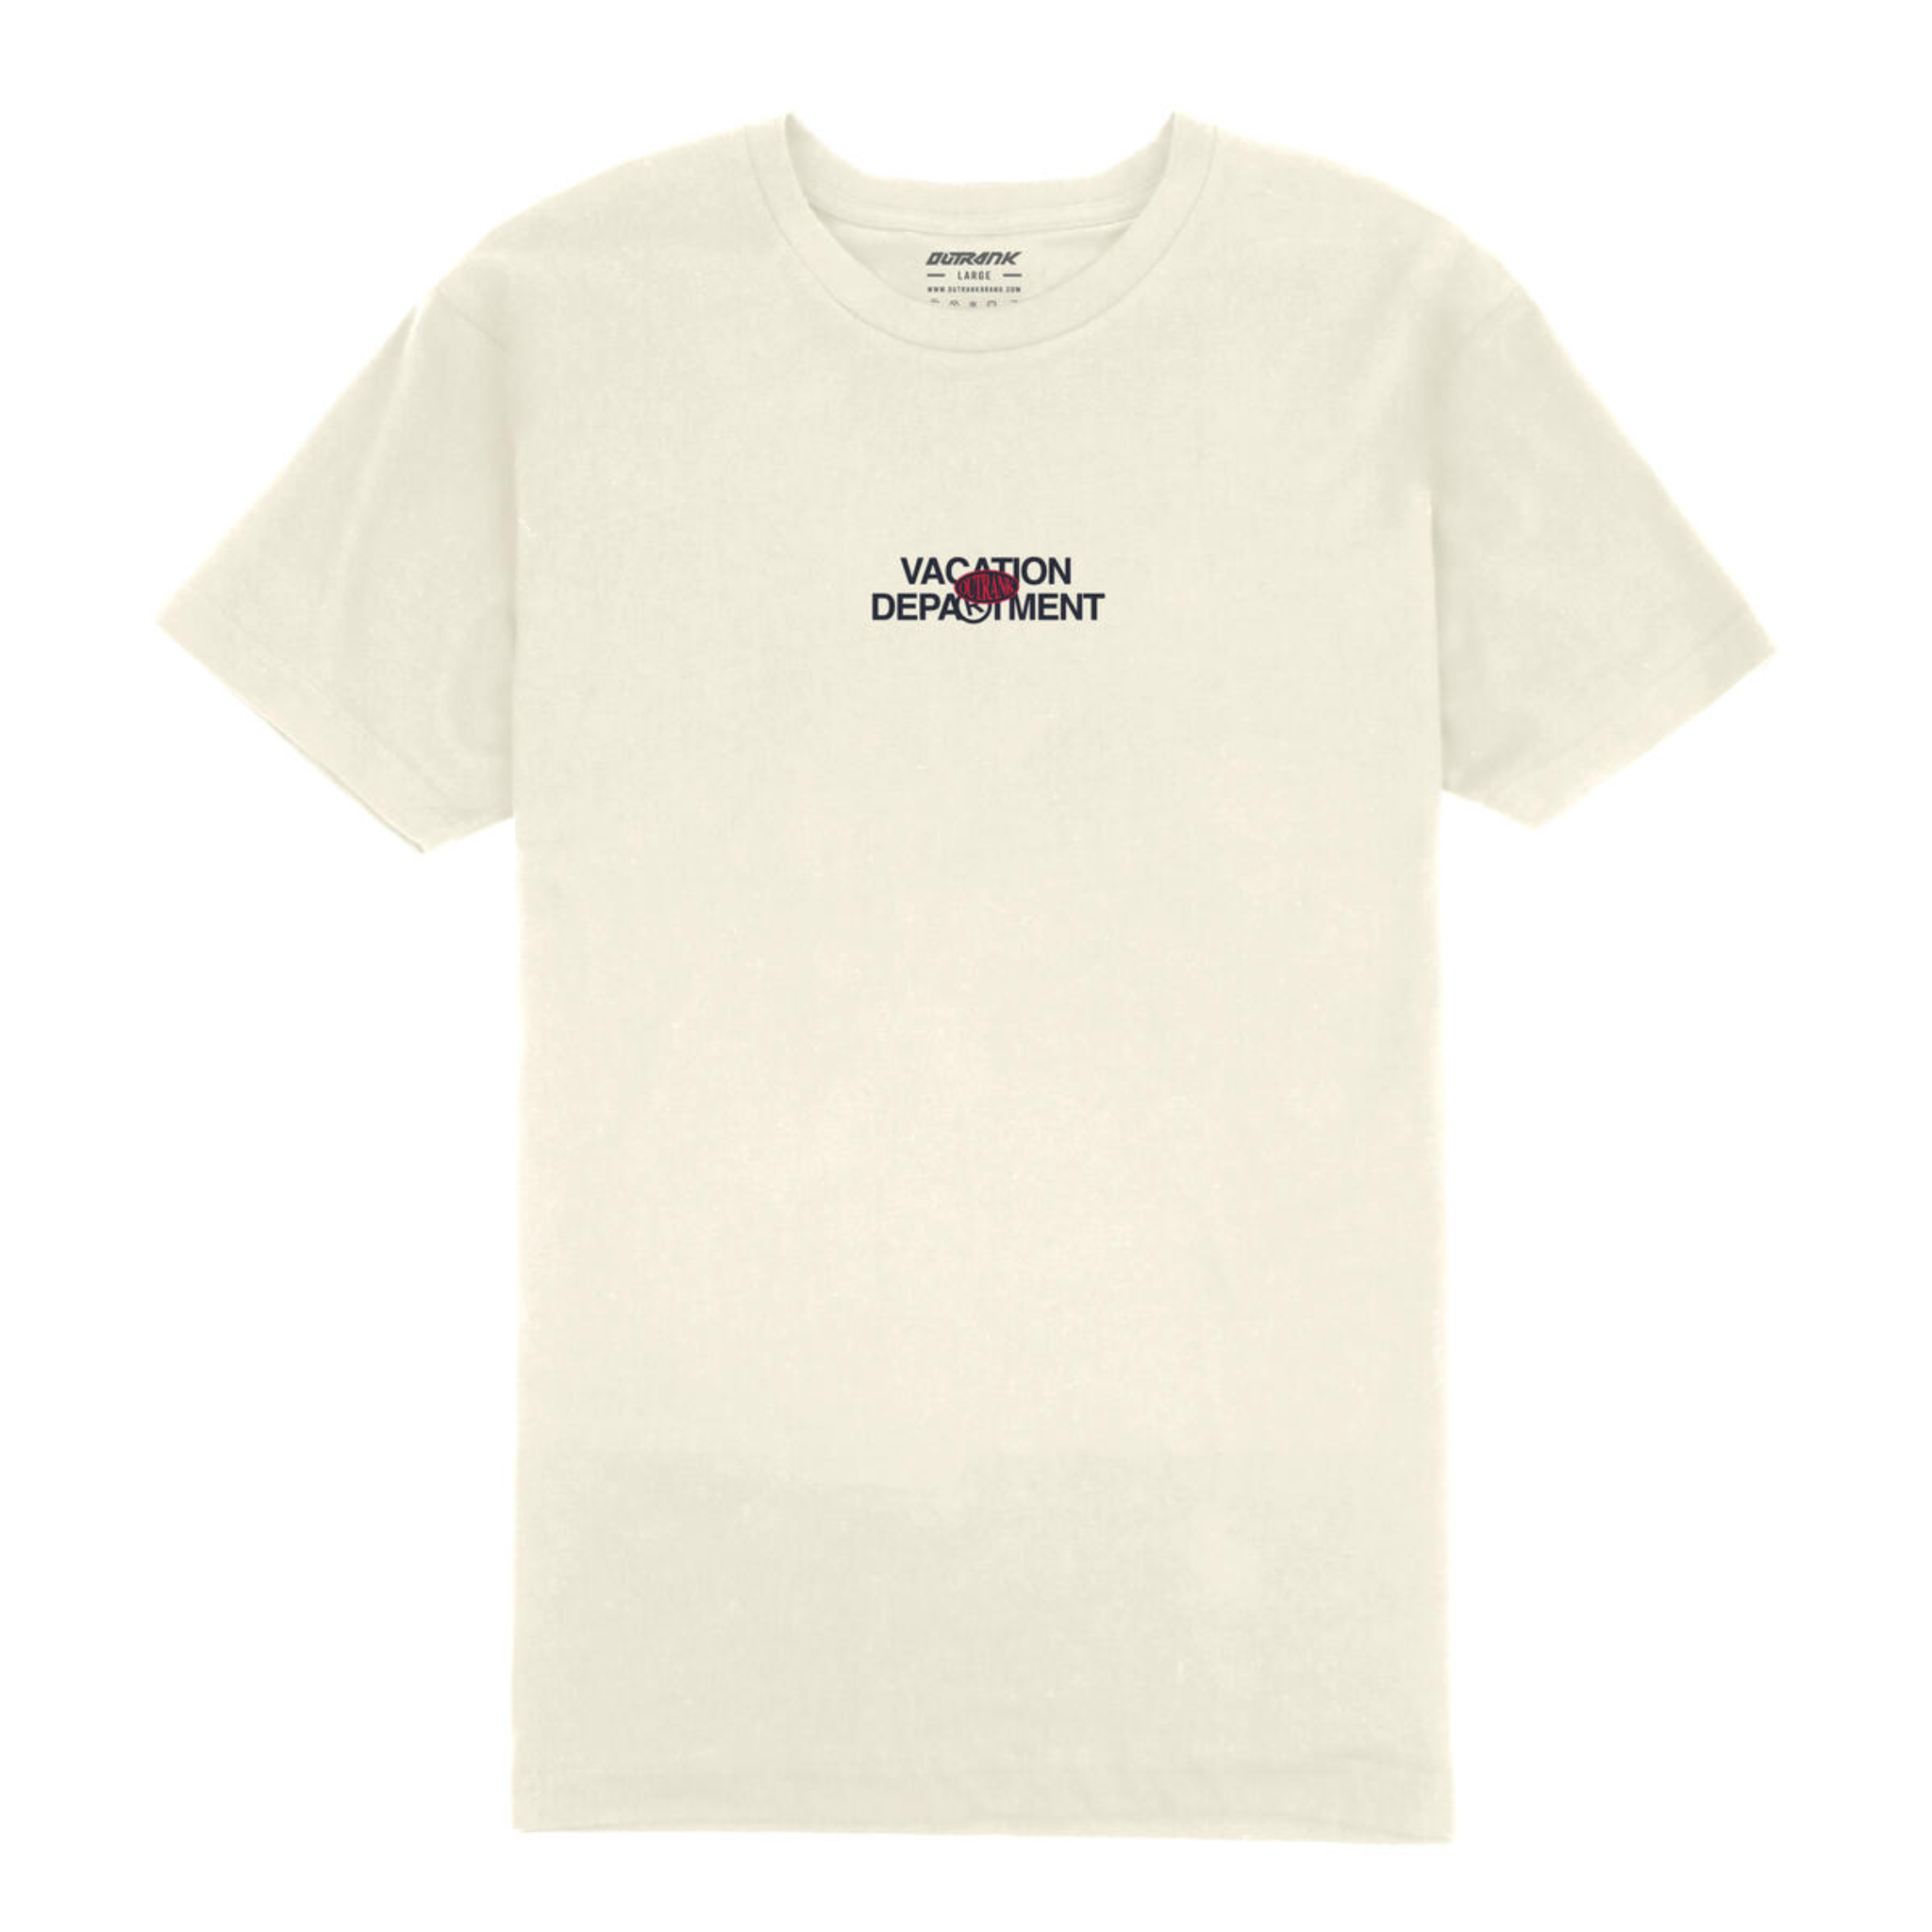 Outrank Vacation Department Embroidered Tee (Vintage White)